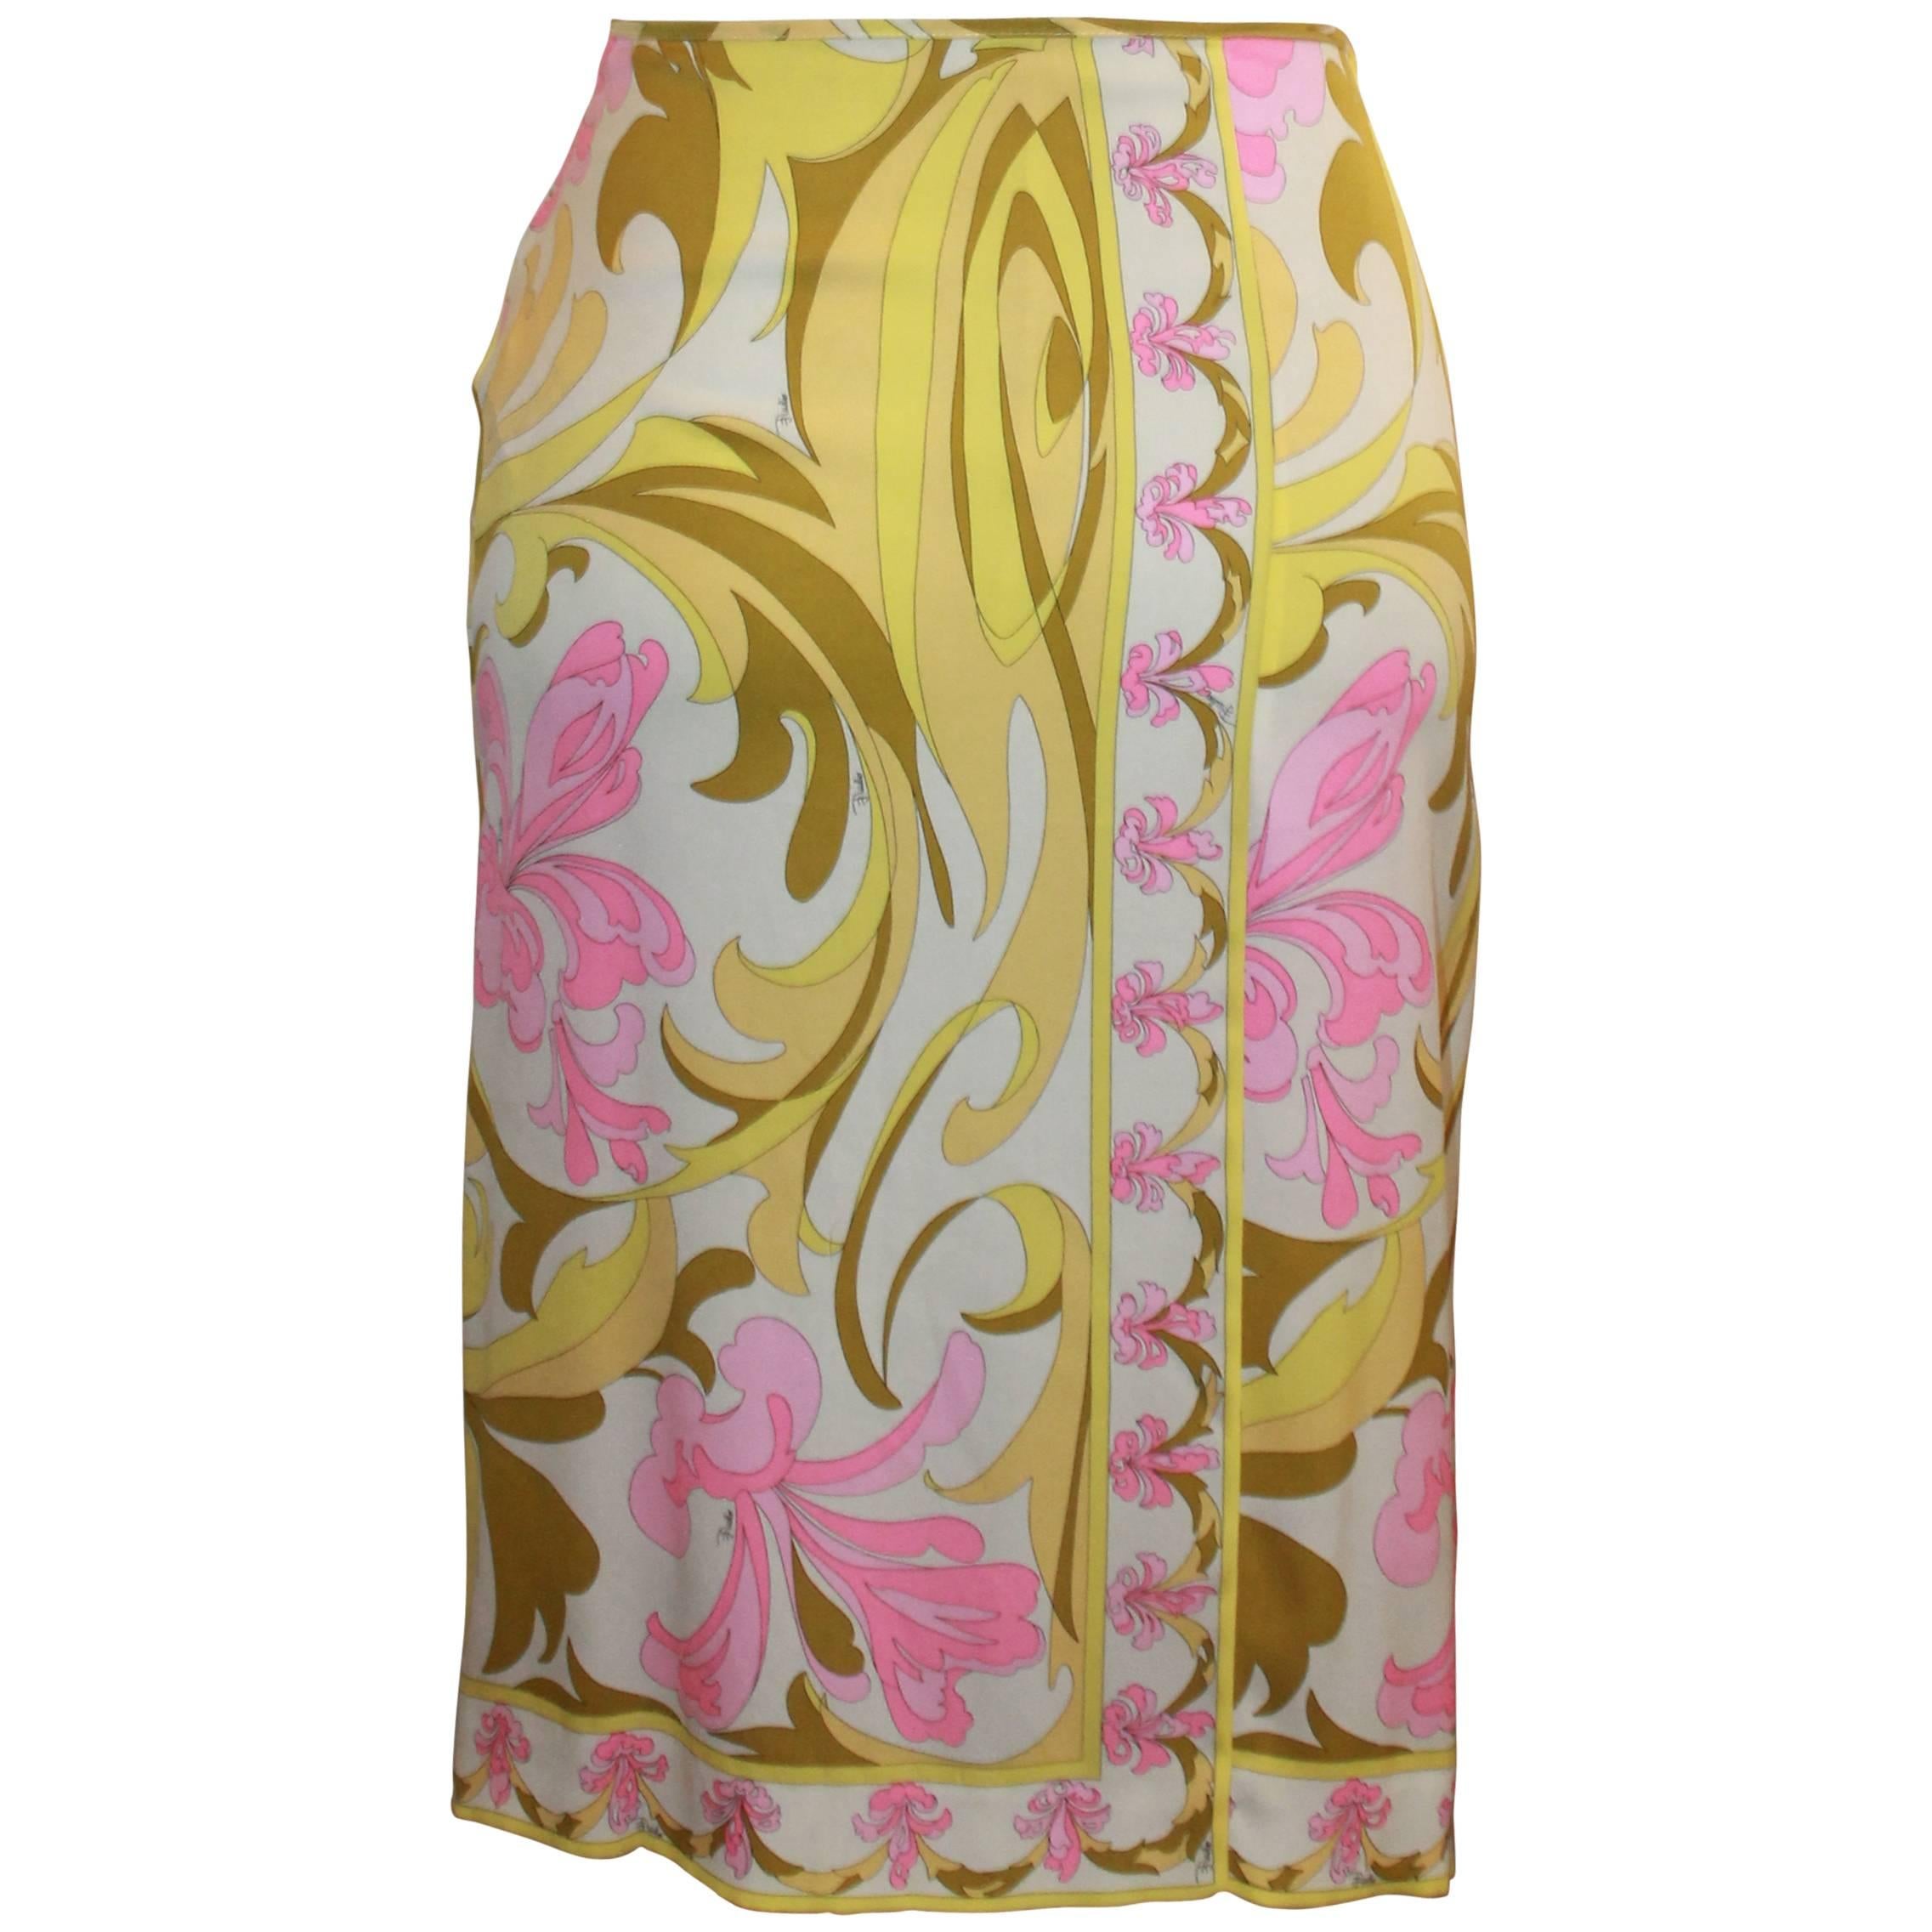 Emilio Pucci Yellow, Green & Pink Printed Skirt - 4 - 1980's